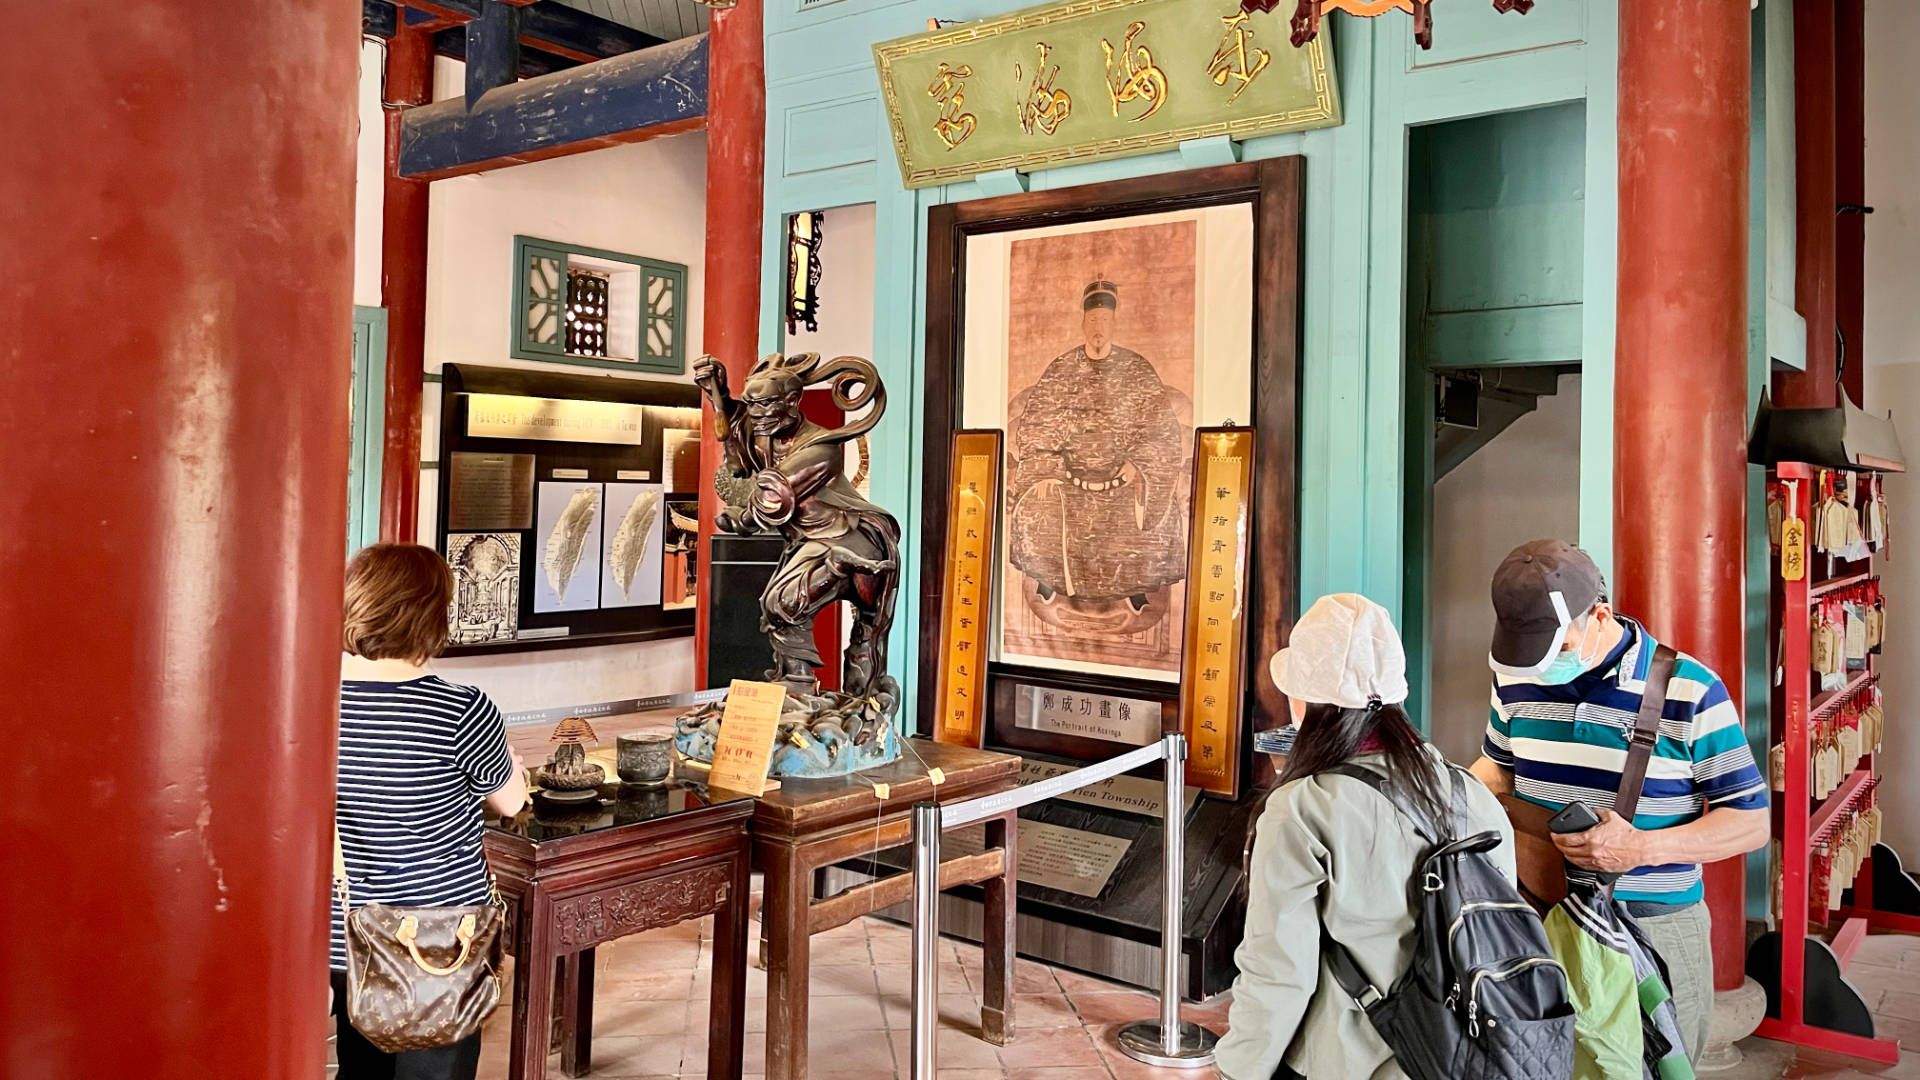 Inside the ground floor of Chihkan Tower. A statue of a god is at center, with tourists standing around. A rack of wooden handing cards is on the right.